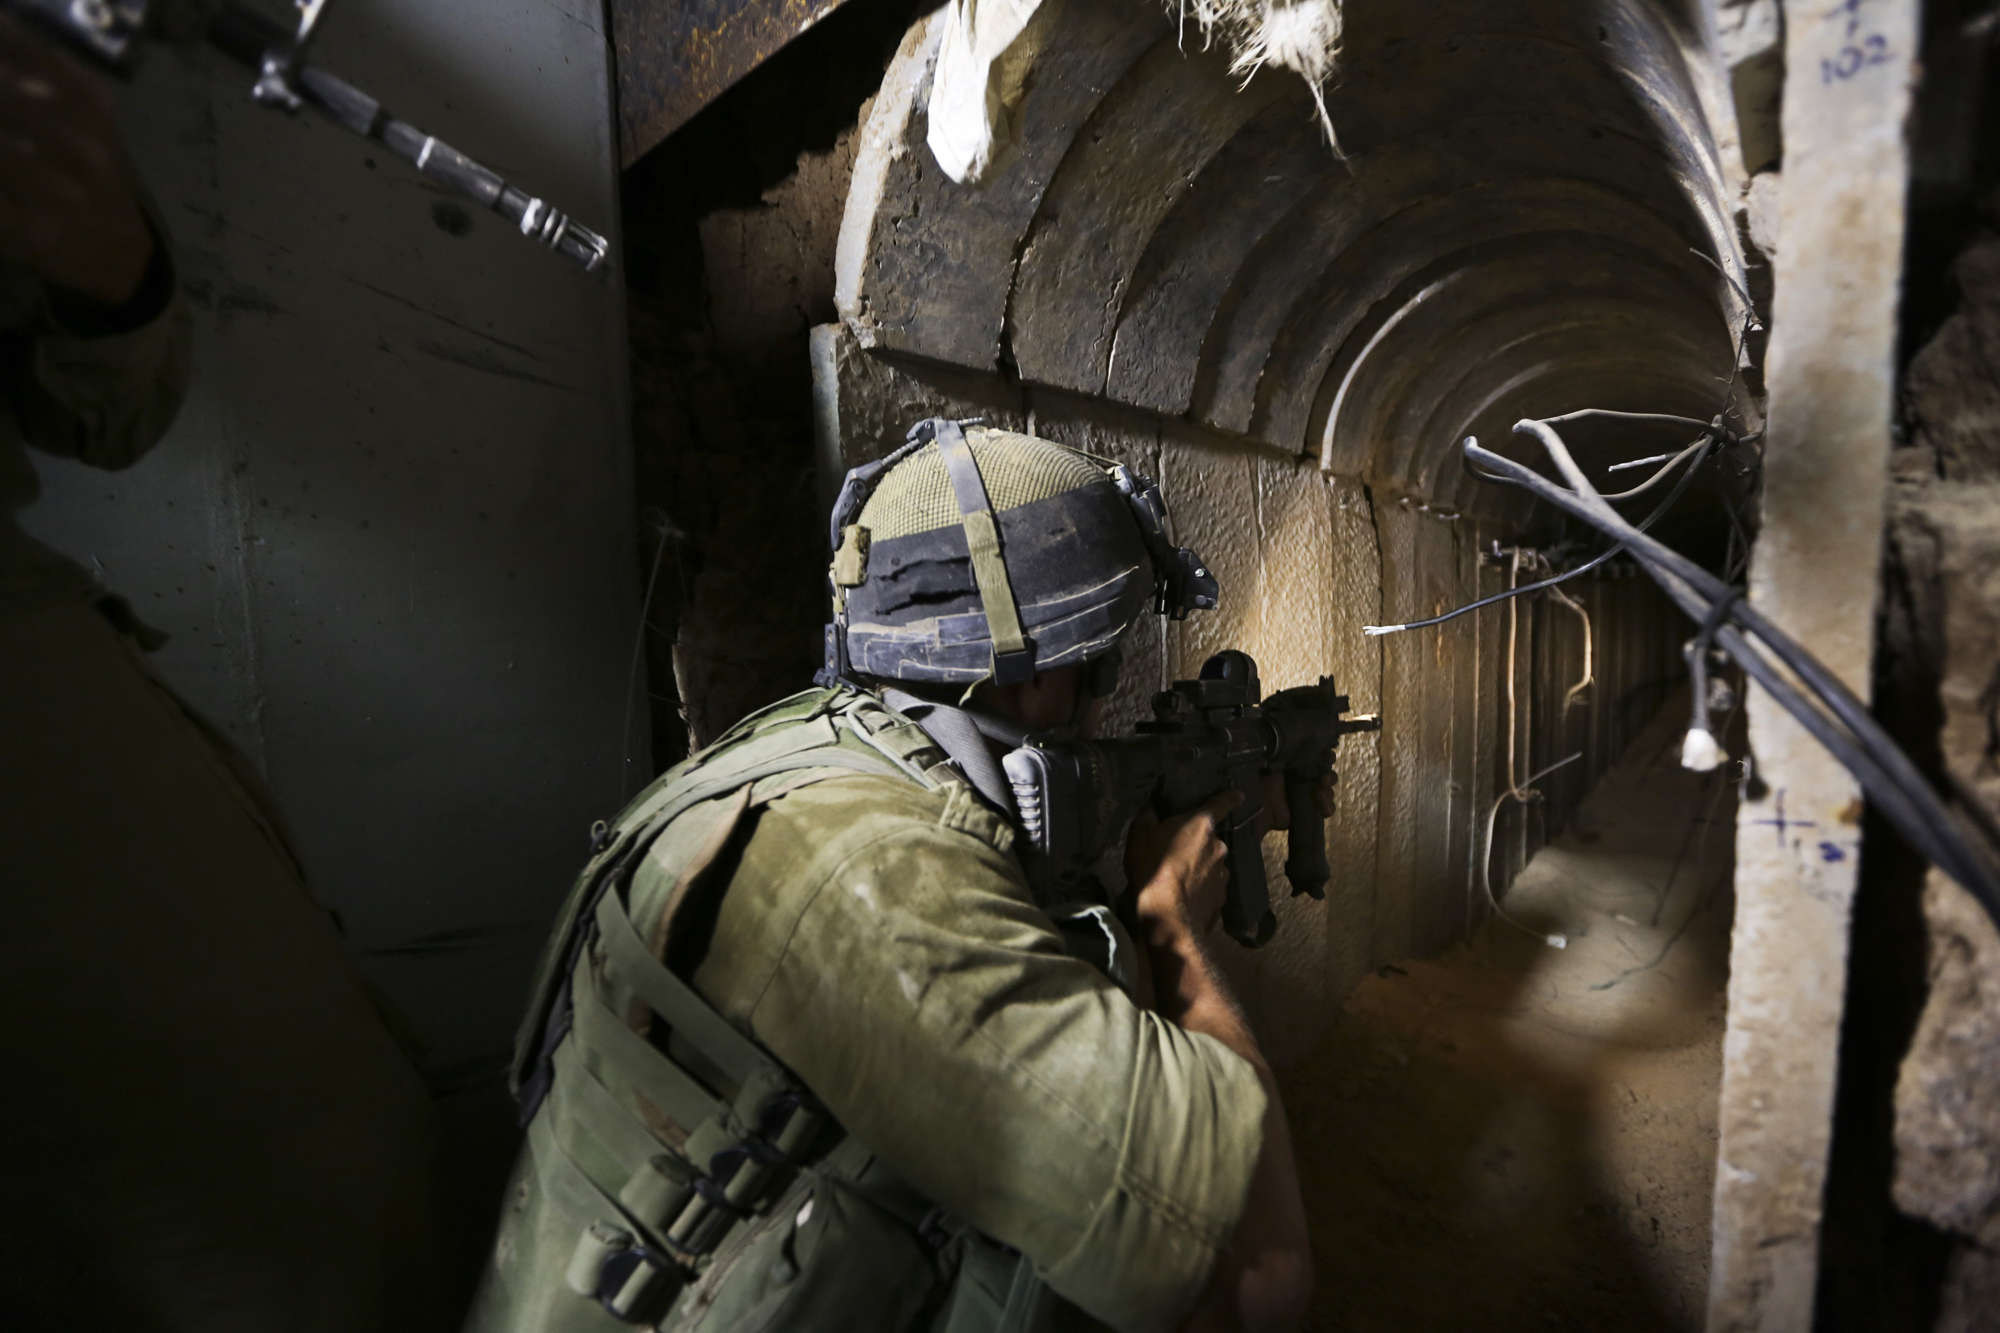 IDF soldiers of the Paratroopers Brigade guarding and neutralizing tunnels that were dug by the Hamas organization and leading into Israel, Khan Younis, Gaza, July 30, 2014.